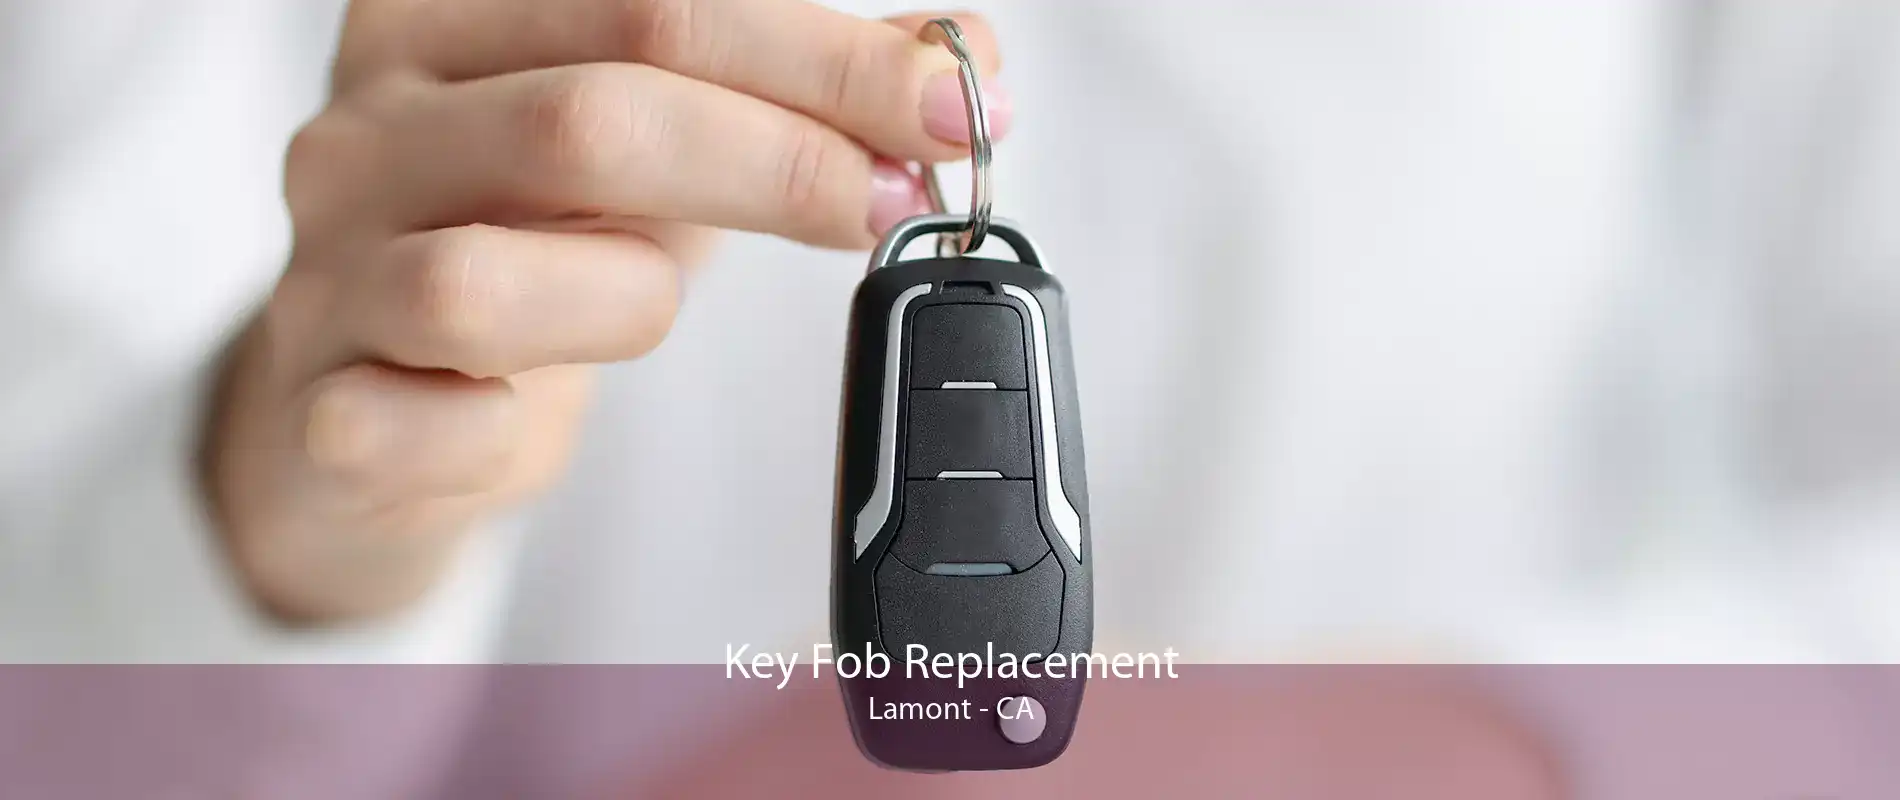 Key Fob Replacement Lamont - CA